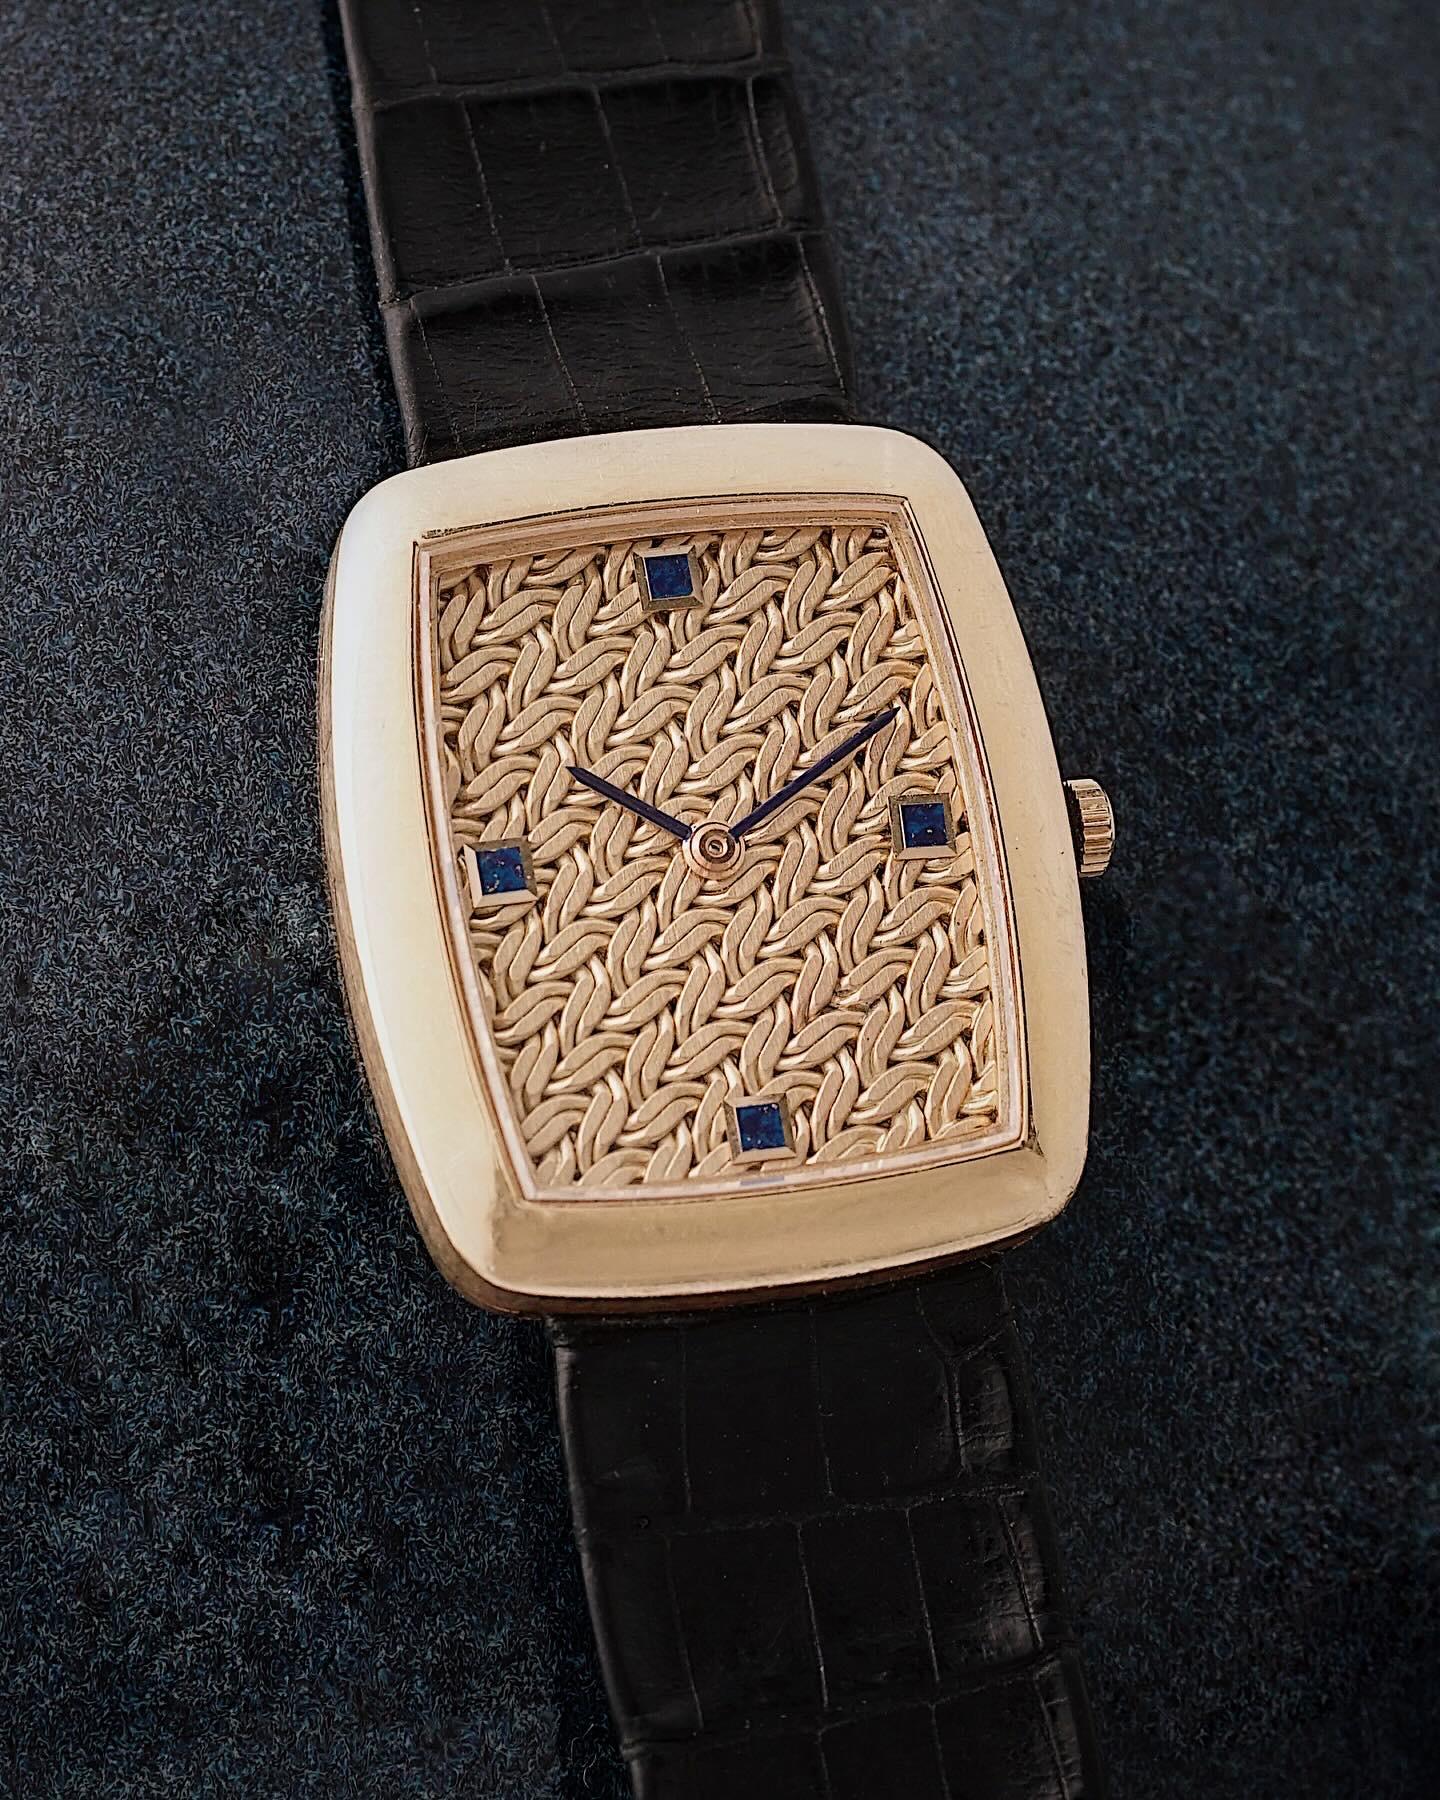 Extremely Rare and possibly unique Audemars Piguet Haute Joaillerie Watch, Circa 1955.
The first feature that catches the eye on this fabulous creation by Audemars Piguet is the woven gold texture of the dial, superbly contrasted by the lapis lazuli